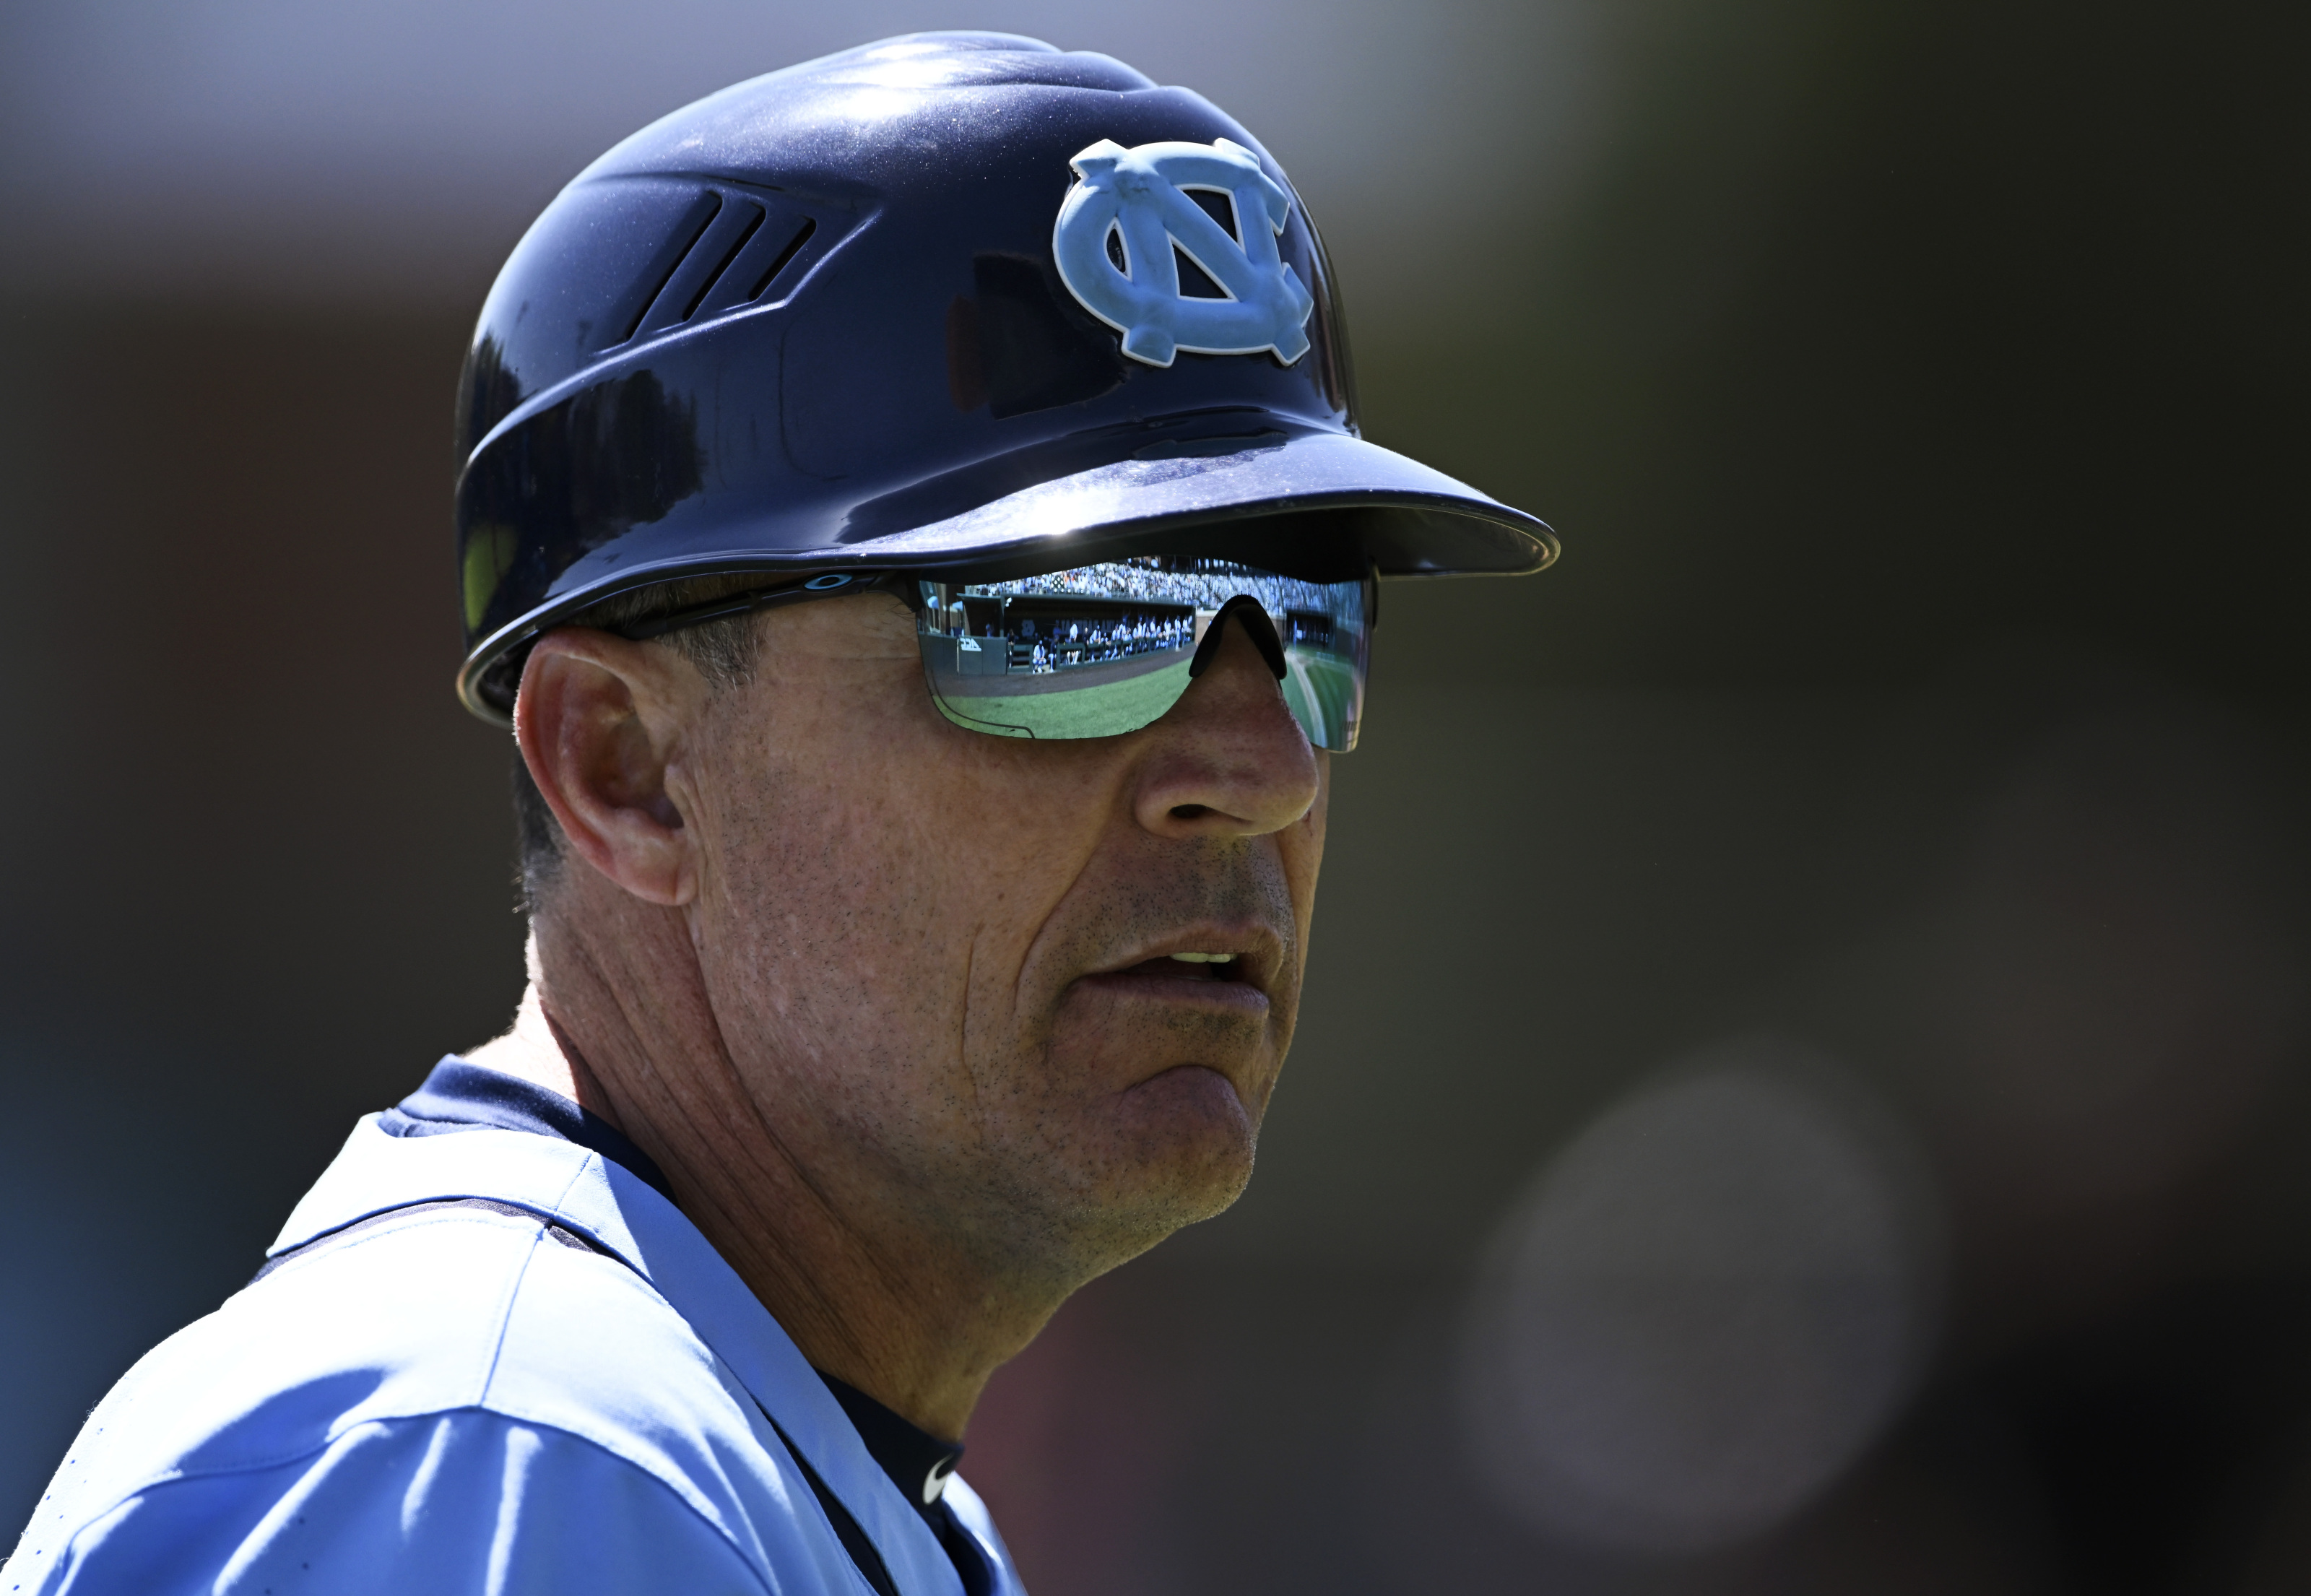 This Week in UNC Baseball with Scott Forbes: Final Prep Before ACC